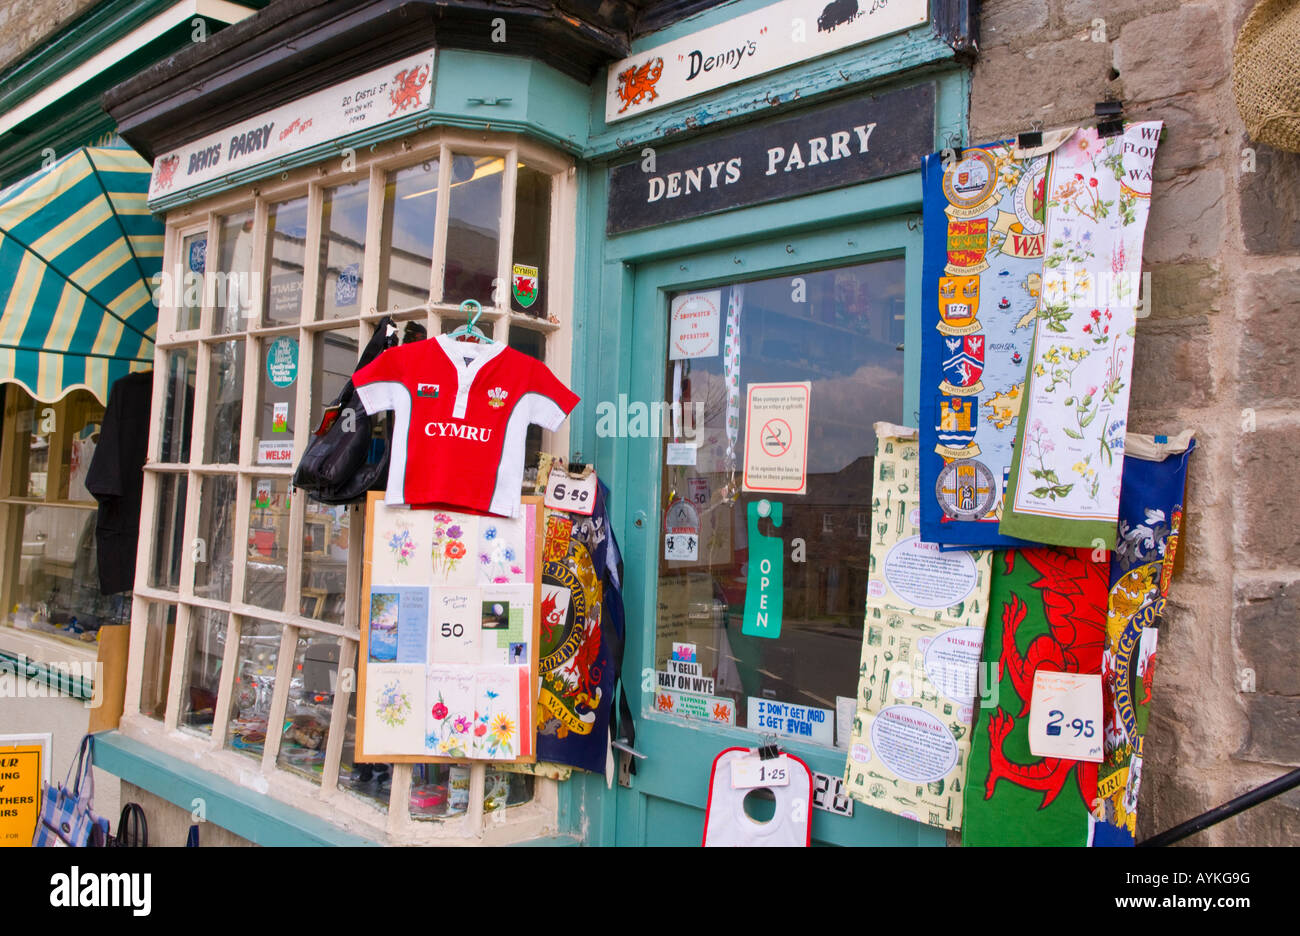 Denys Parry Welsh souvenir shop in town of Hay on Wye Powys Wales UK EU Stock Photo